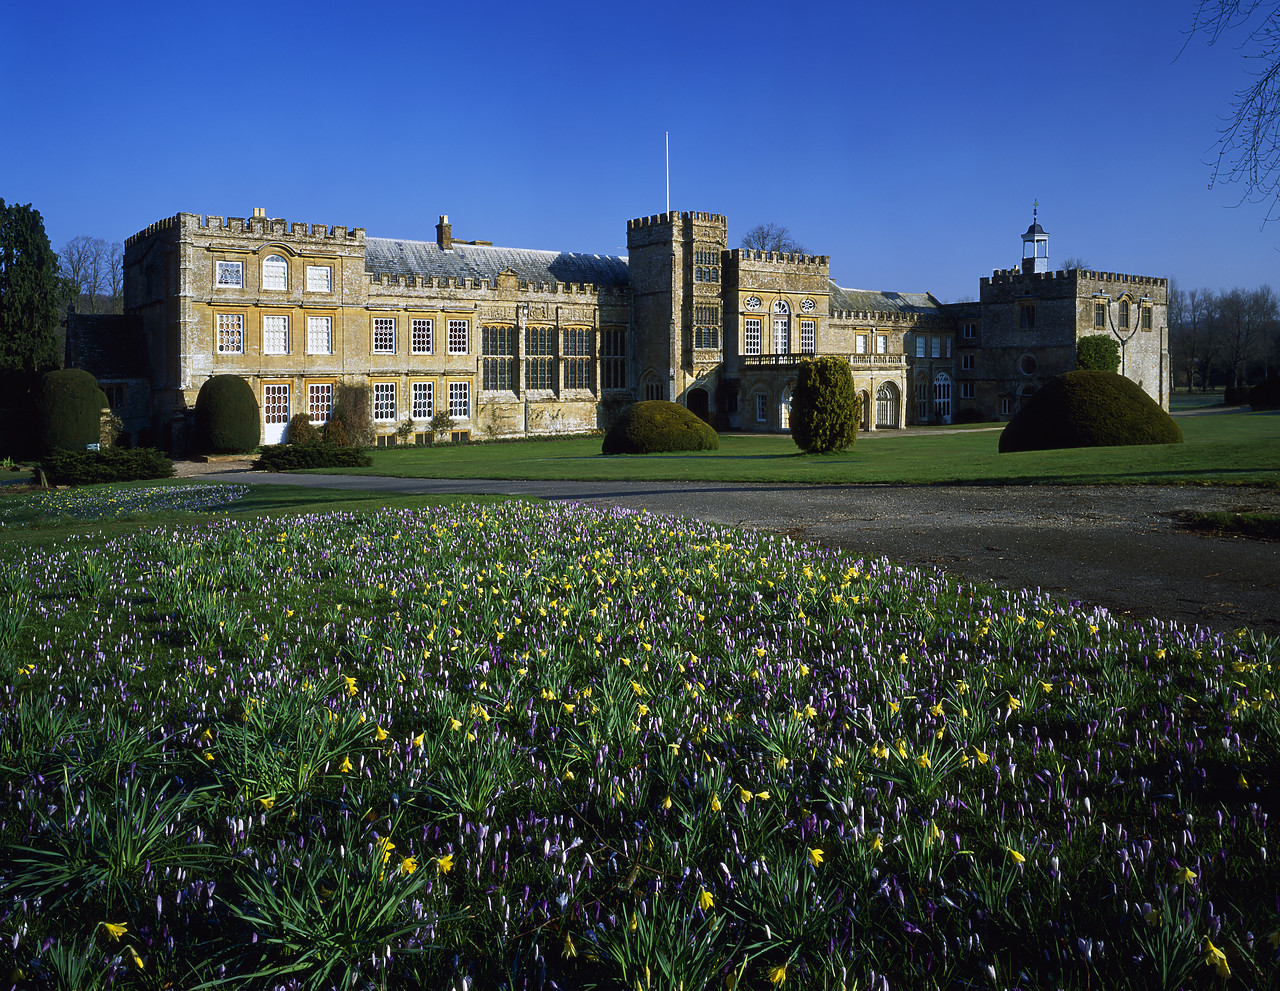 #040056-6 - Forde Abbey in Spring, Chard, Dorset, England